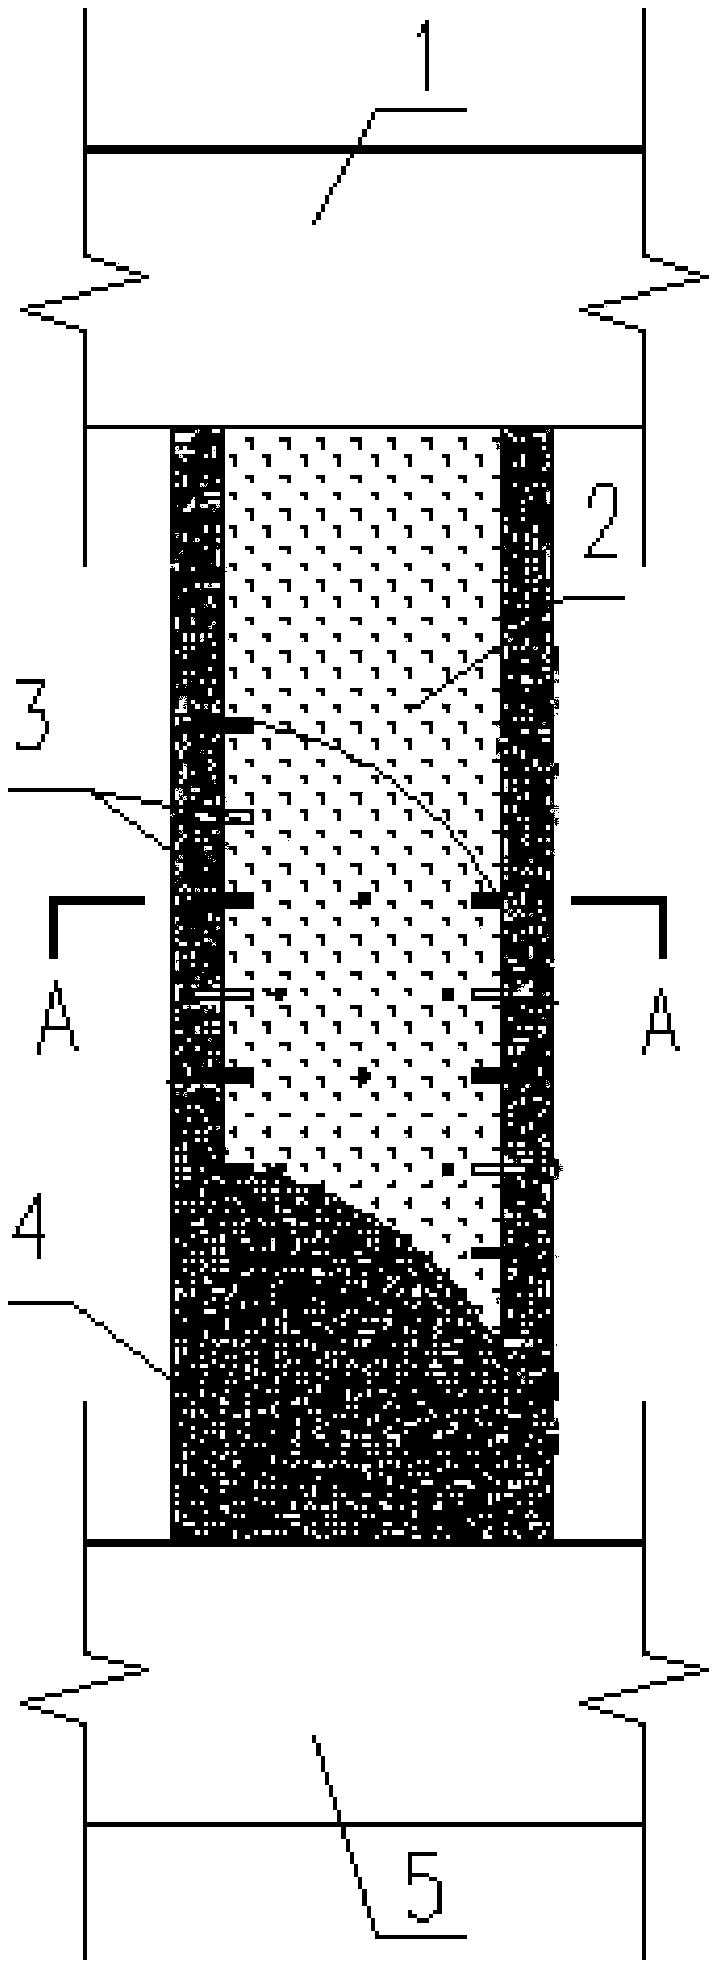 Method for reinforcing concrete columns by adopting UHPC